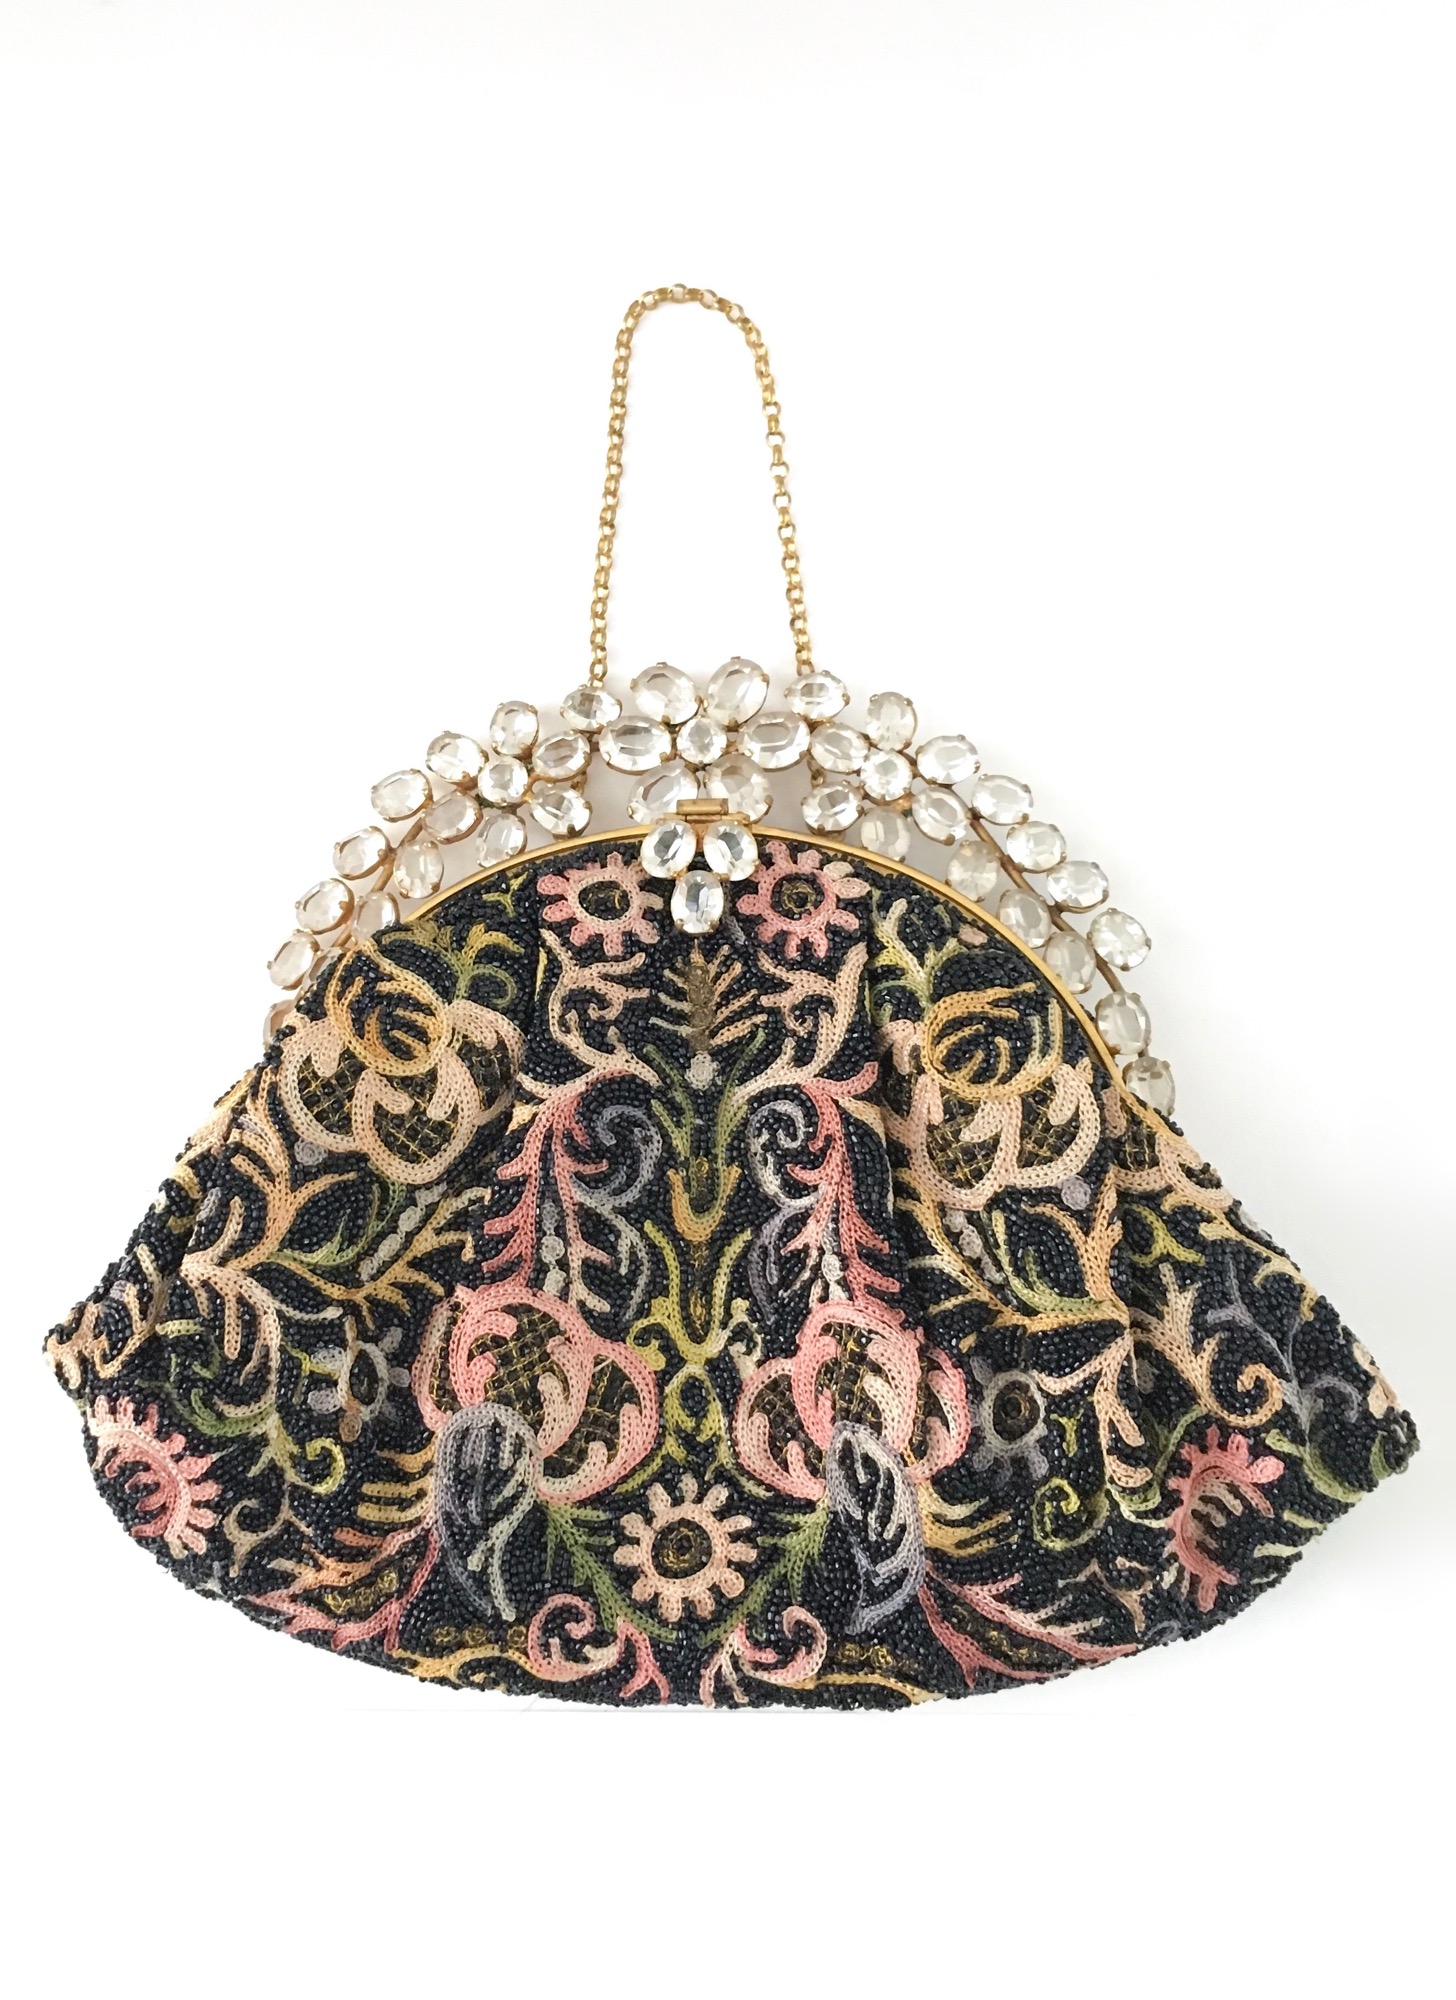 Vintage 1950s Bronze Color Glass Beaded Purse with Rhinestone Decorated  Frame - Mint Condition Evening Bag